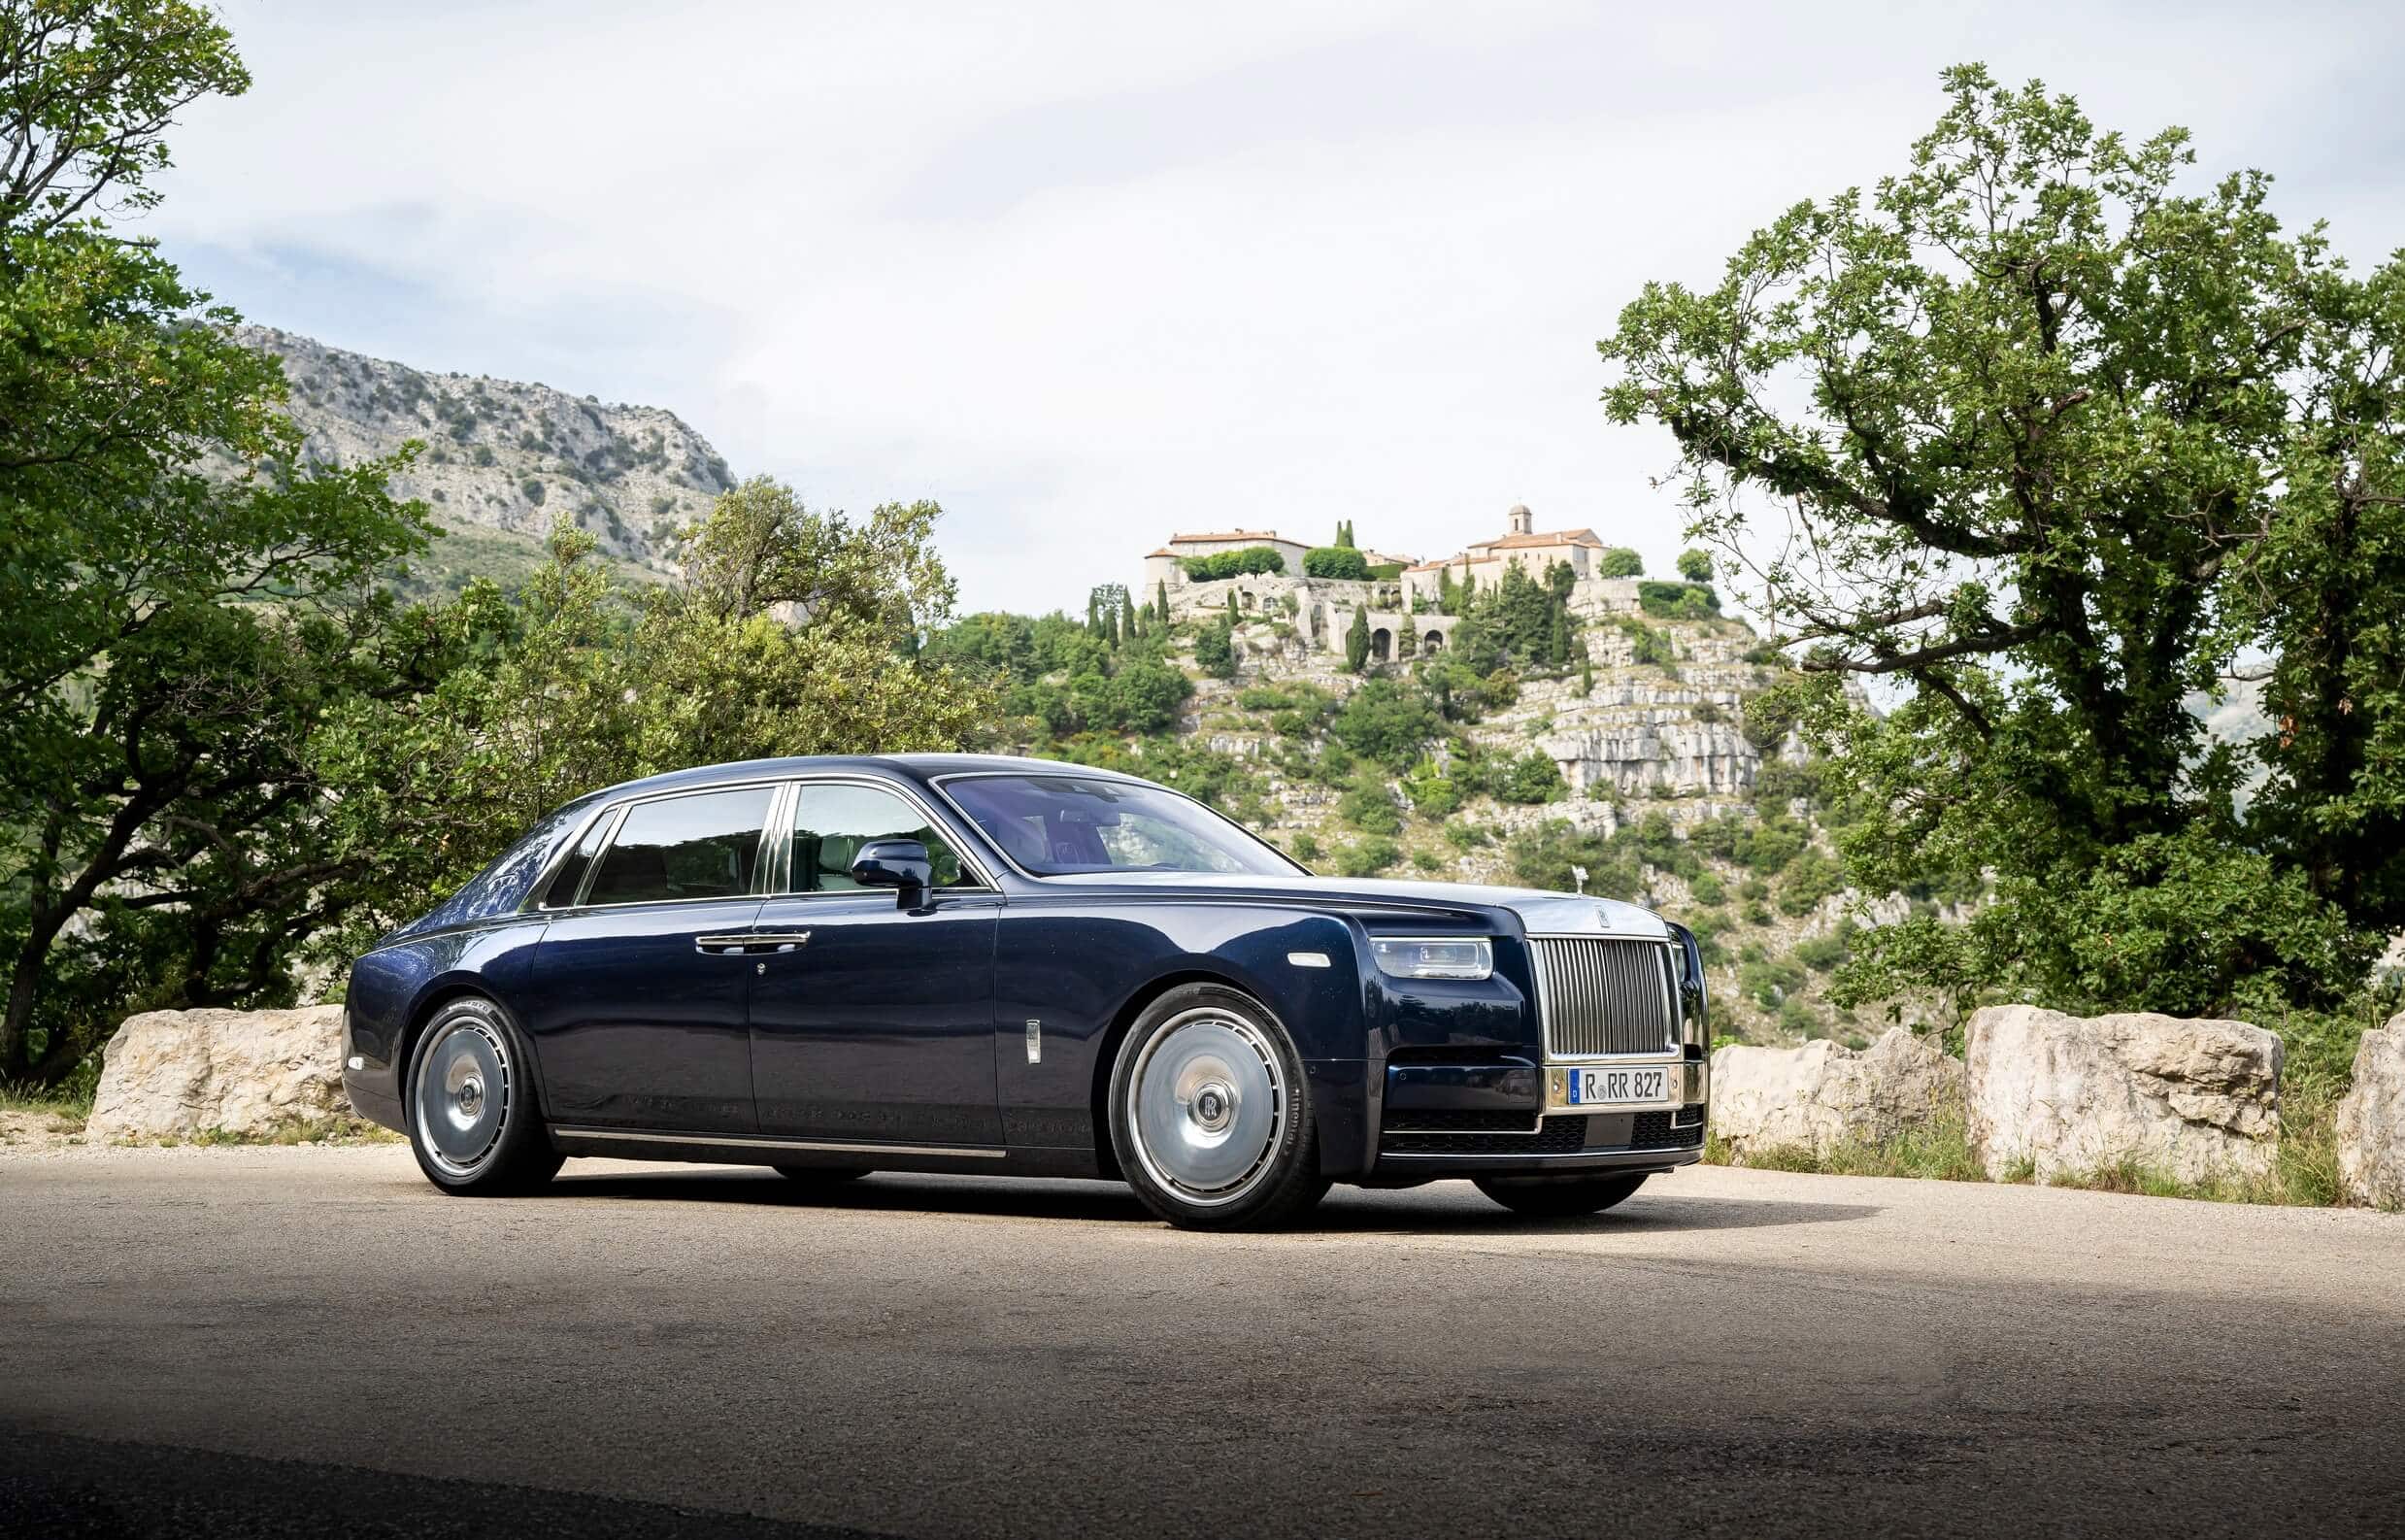 2023 Rolls-Royce Phantom Brings Its Disc Wheels To The French Riviera